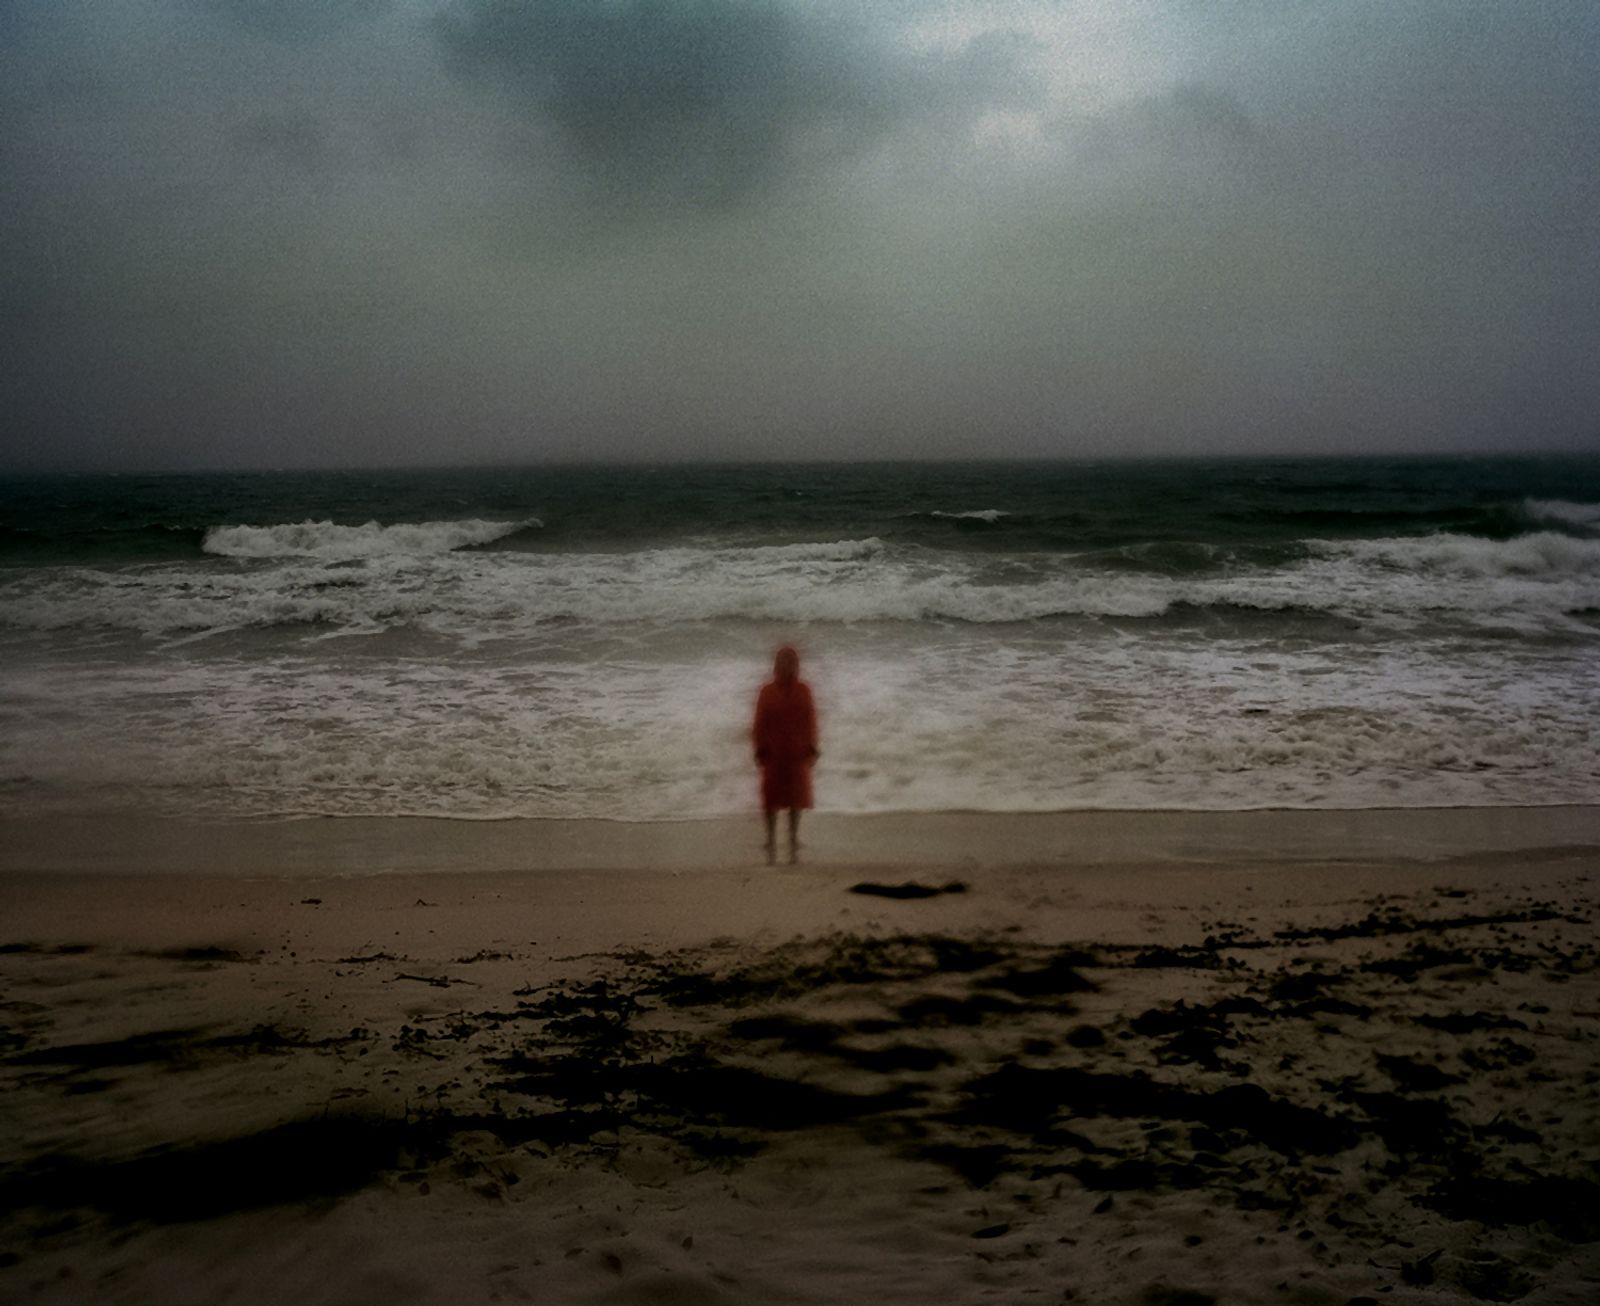 © Aletheia Casey - Image from the Which way is North? photography project